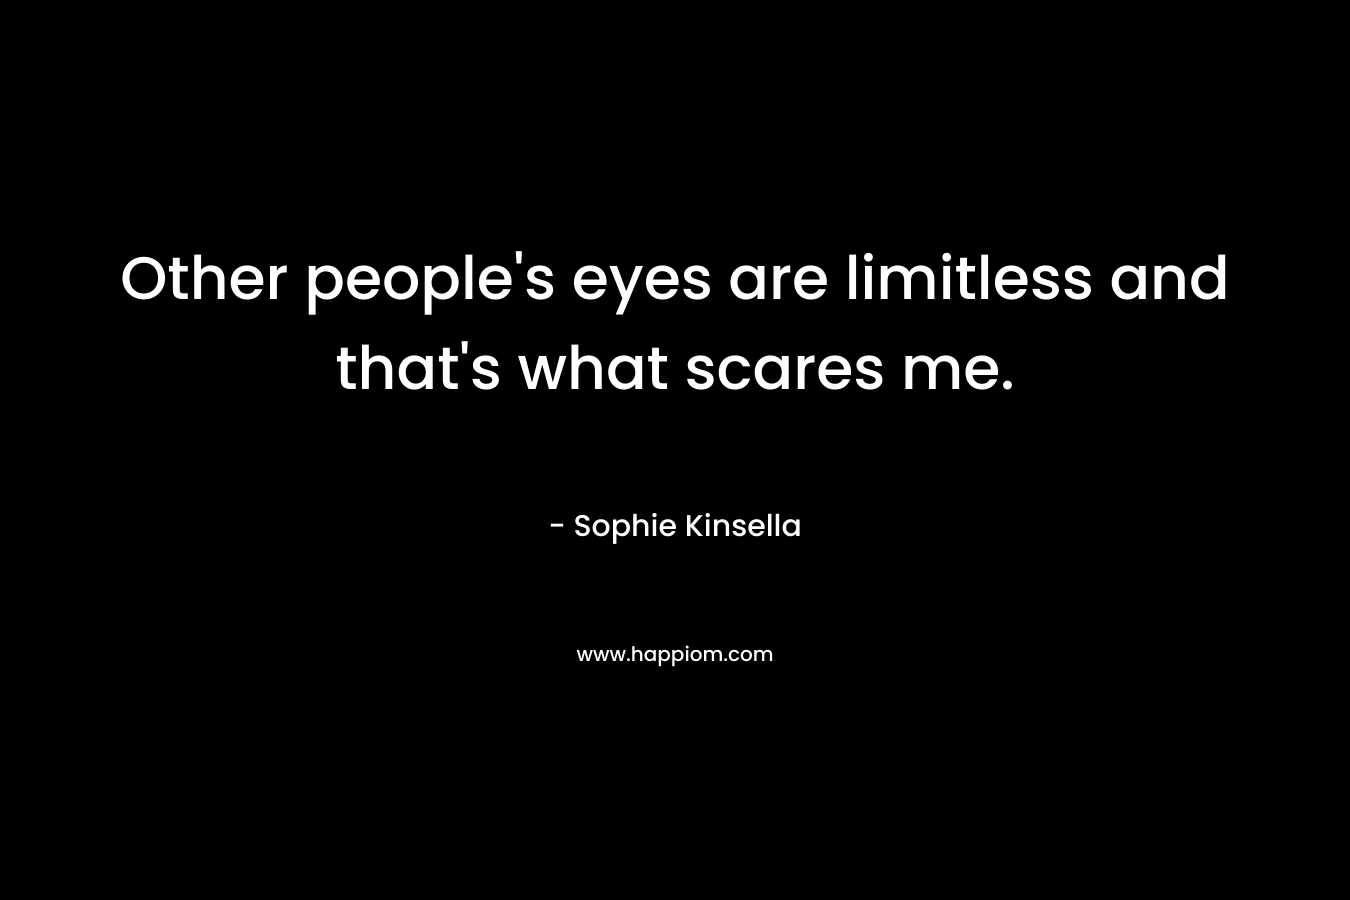 Other people’s eyes are limitless and that’s what scares me. – Sophie Kinsella